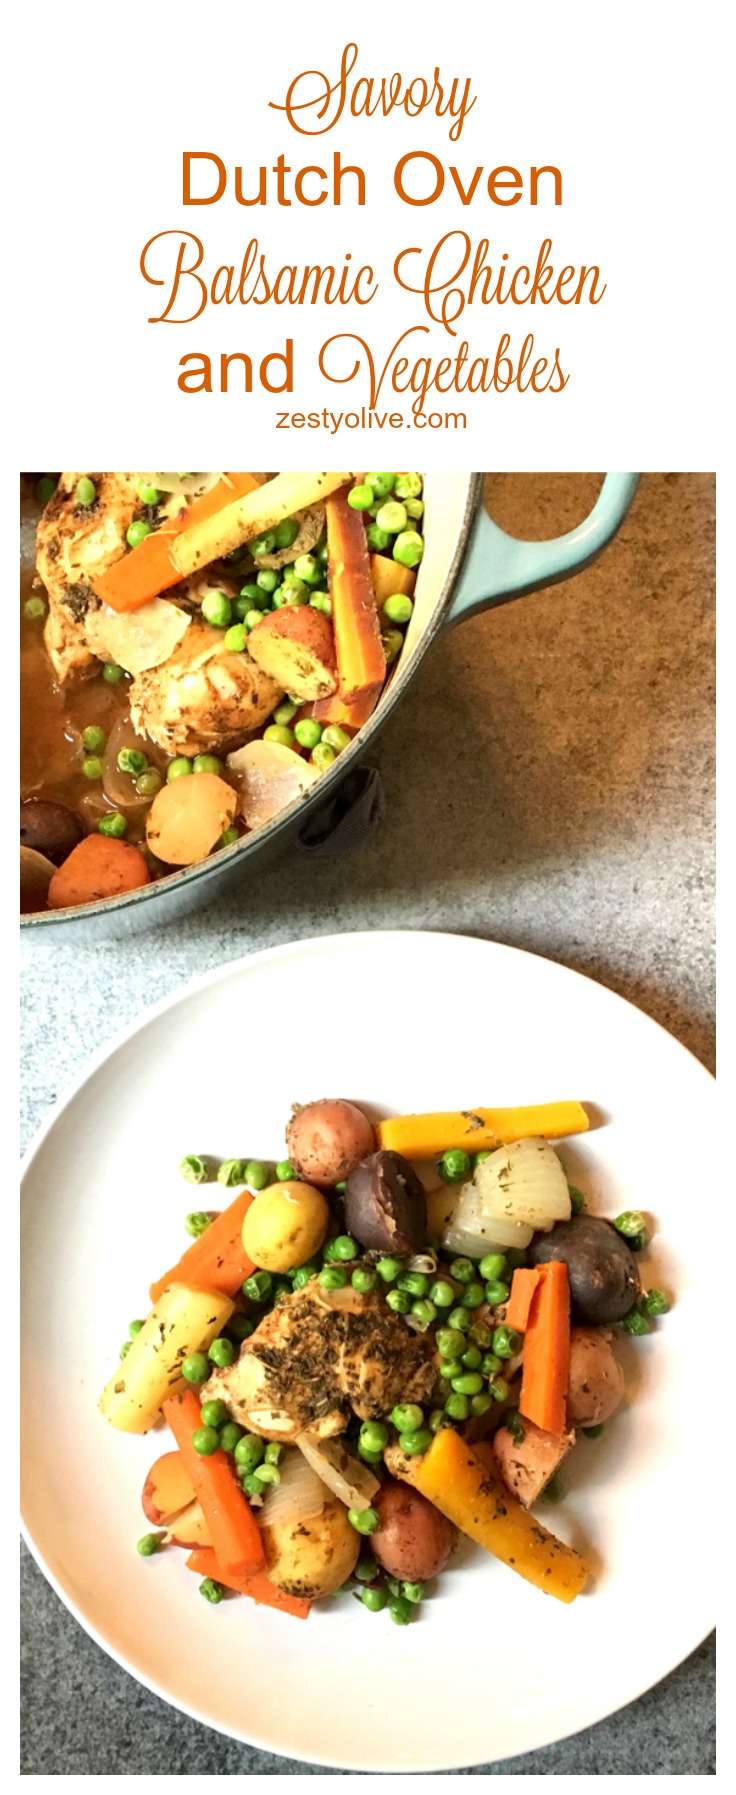 Savory Dutch Oven Balsamic Chicken and Vegetables